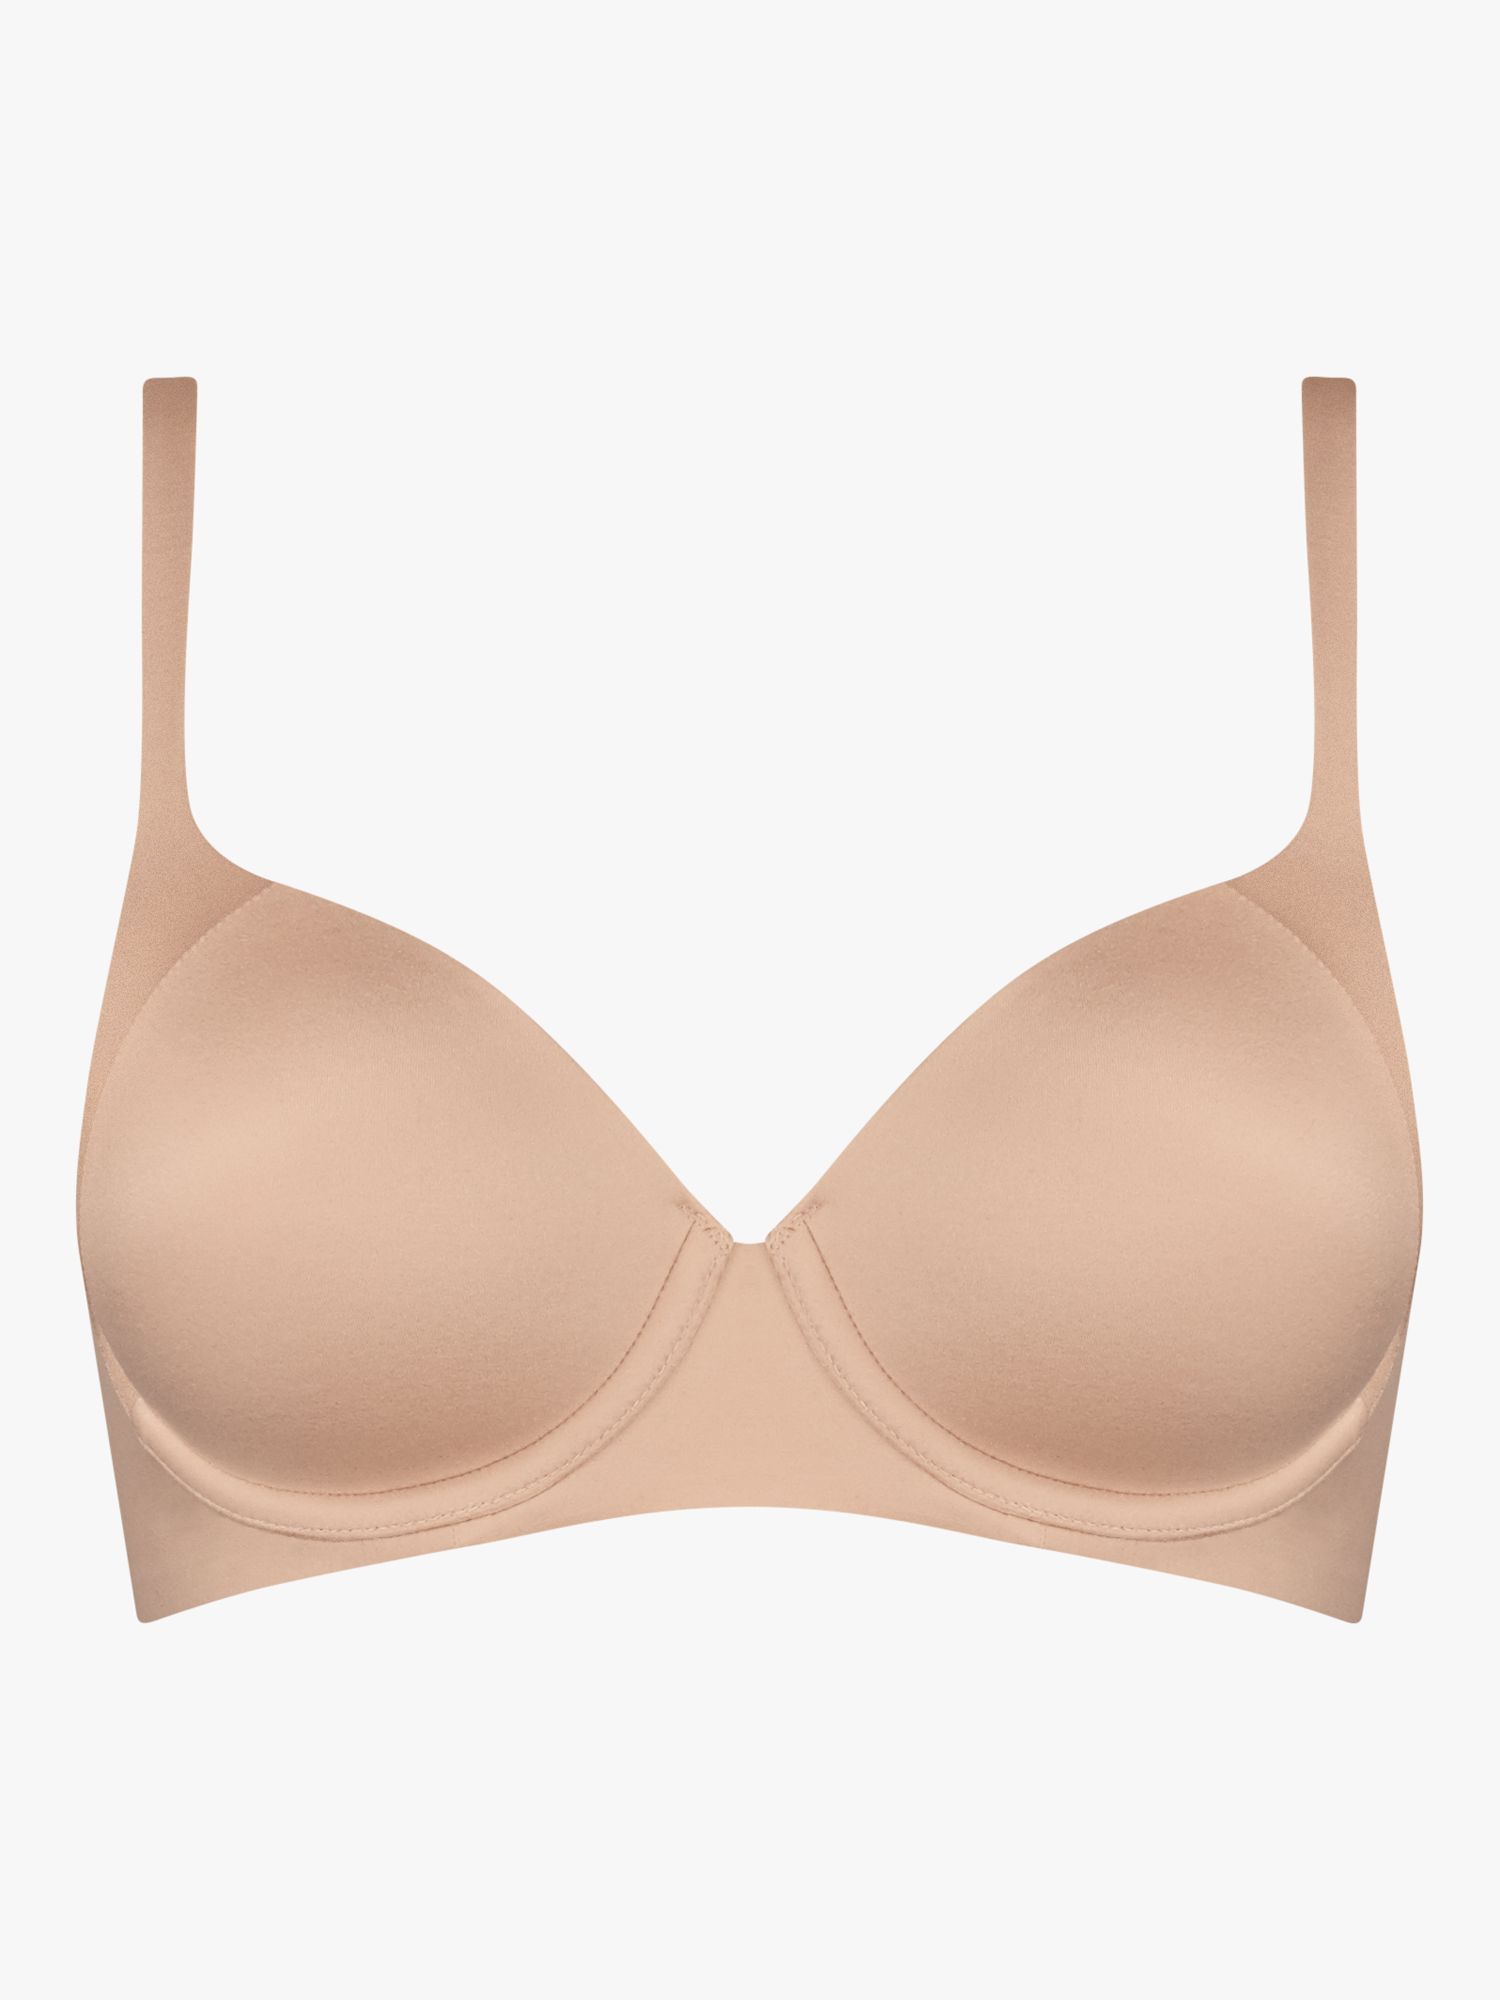 Triumph Bra: Comfortable and Supportive Options for Every Body Type